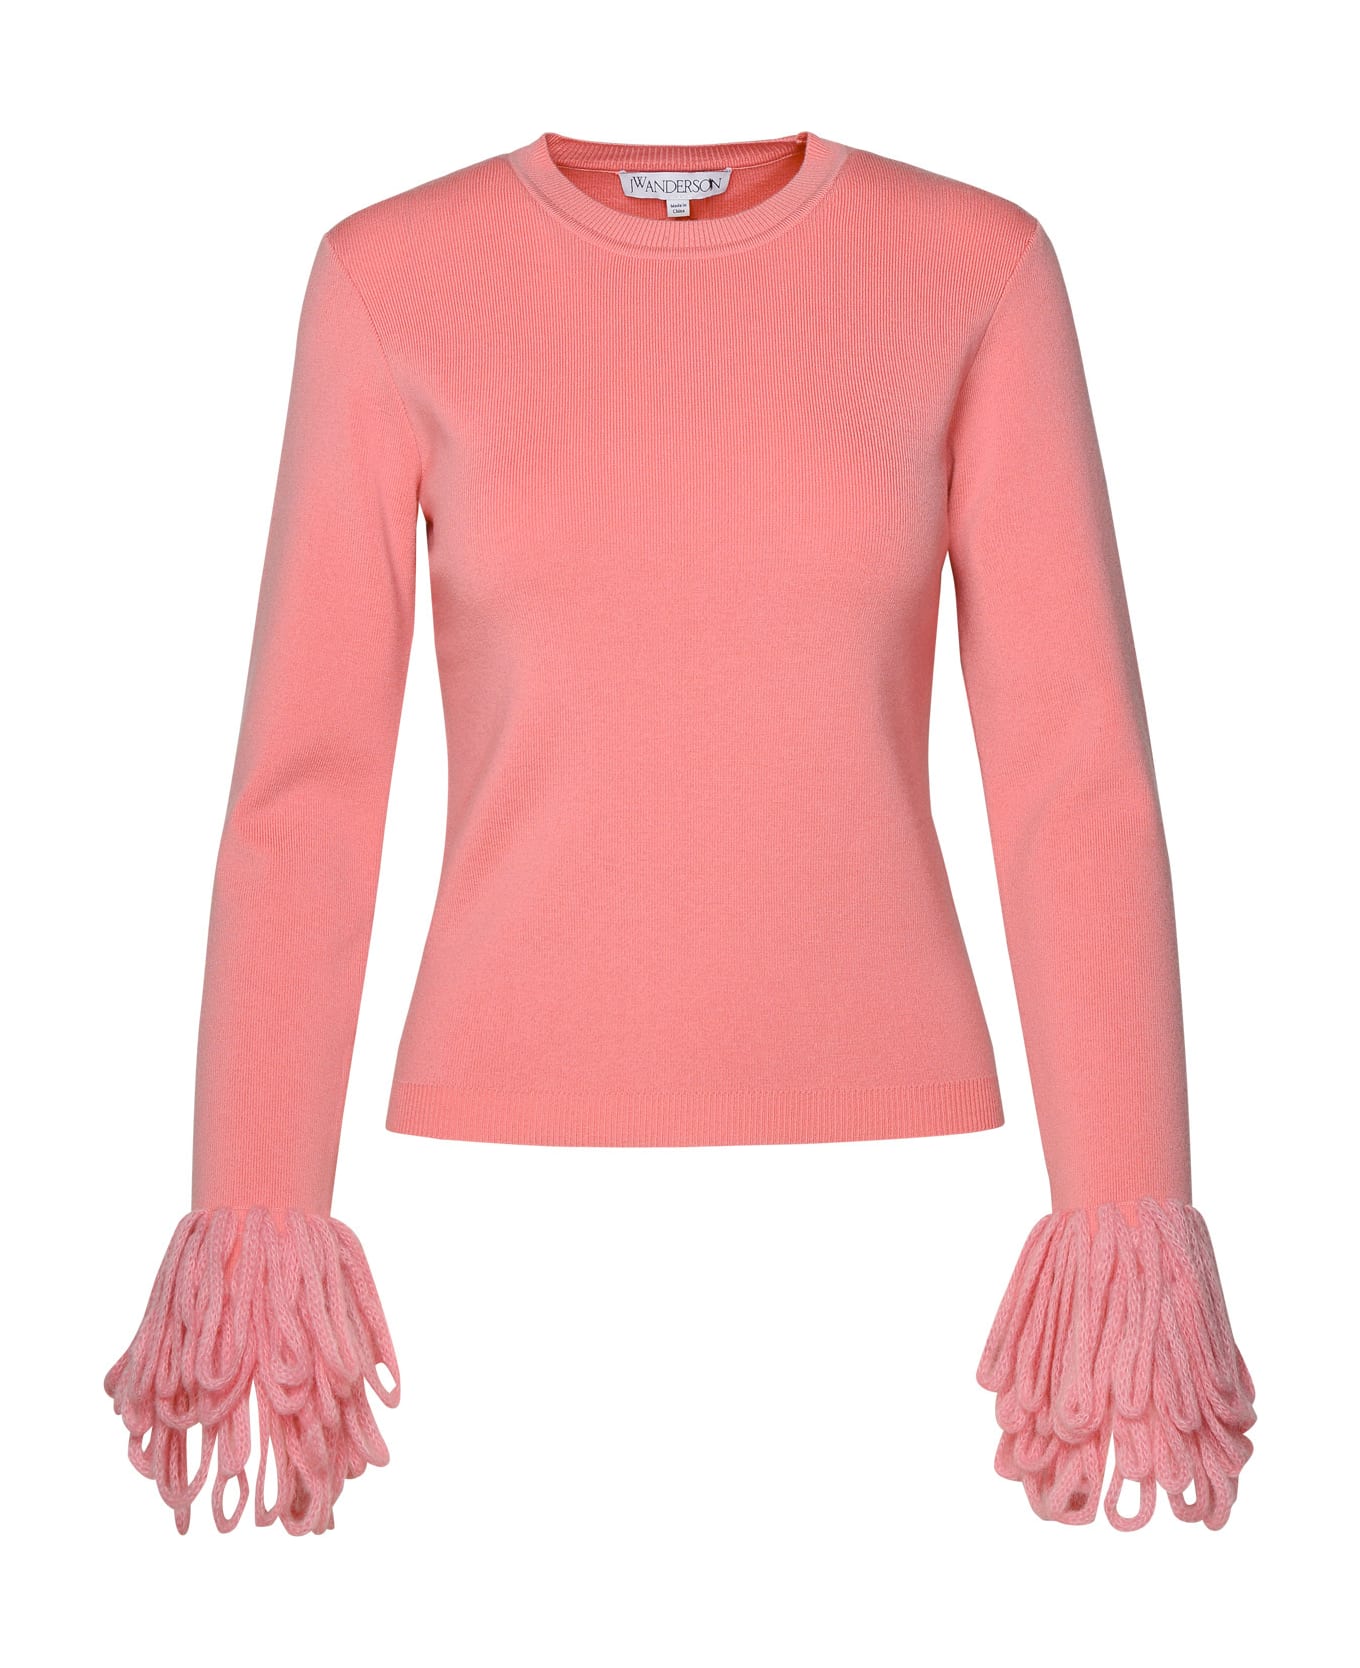 J.W. Anderson Pink Wool Blend Sweater - Pink